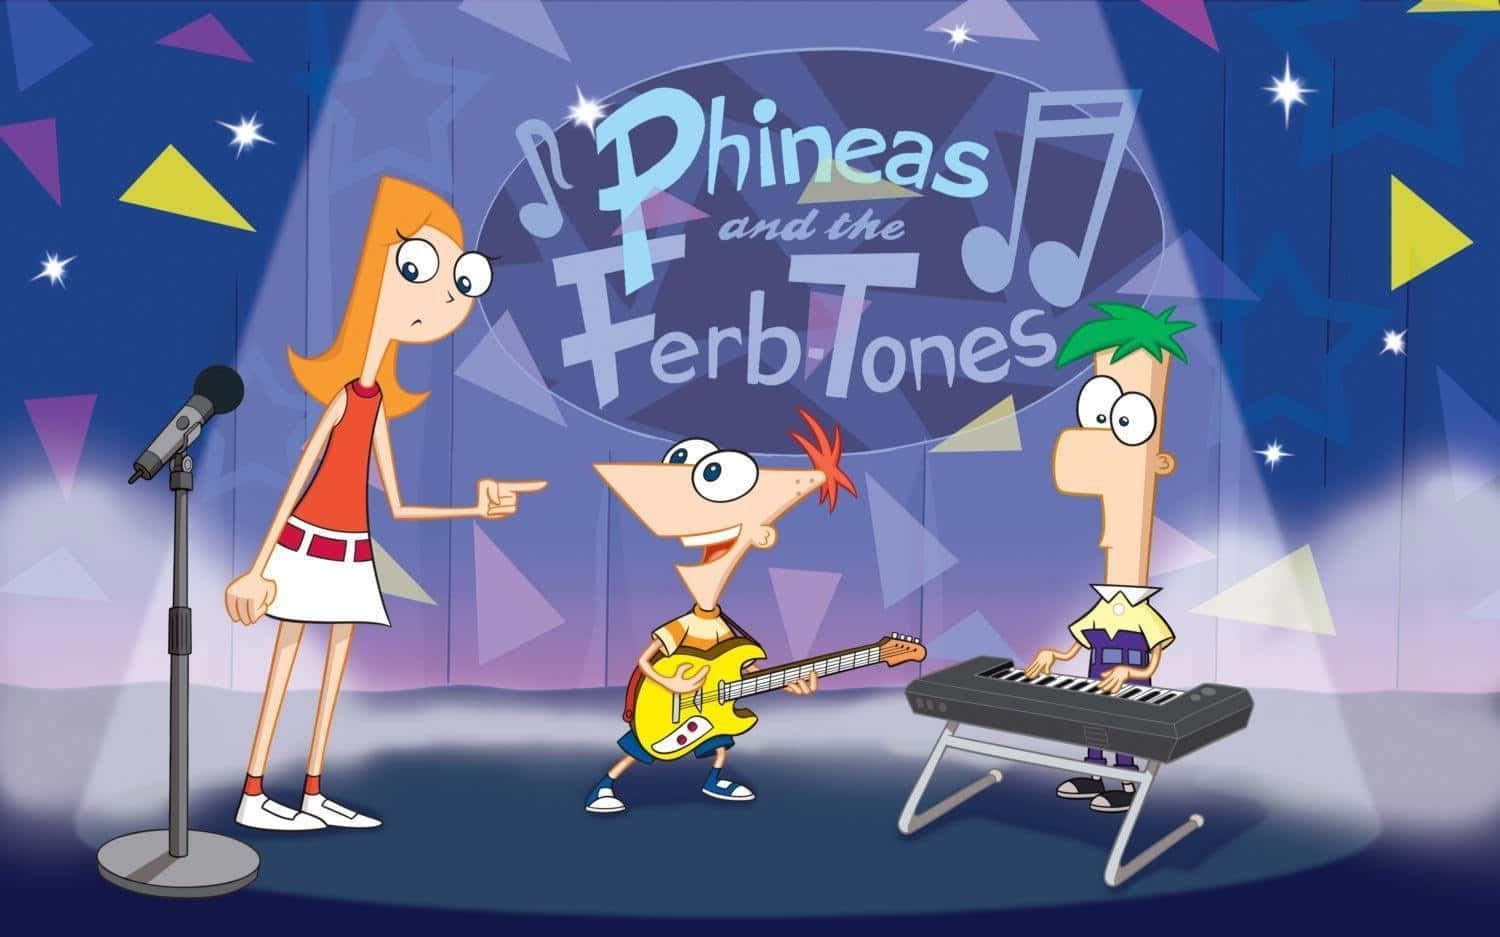 Phineas and Ferb enjoying a fun summer adventure with friends in their backyard.